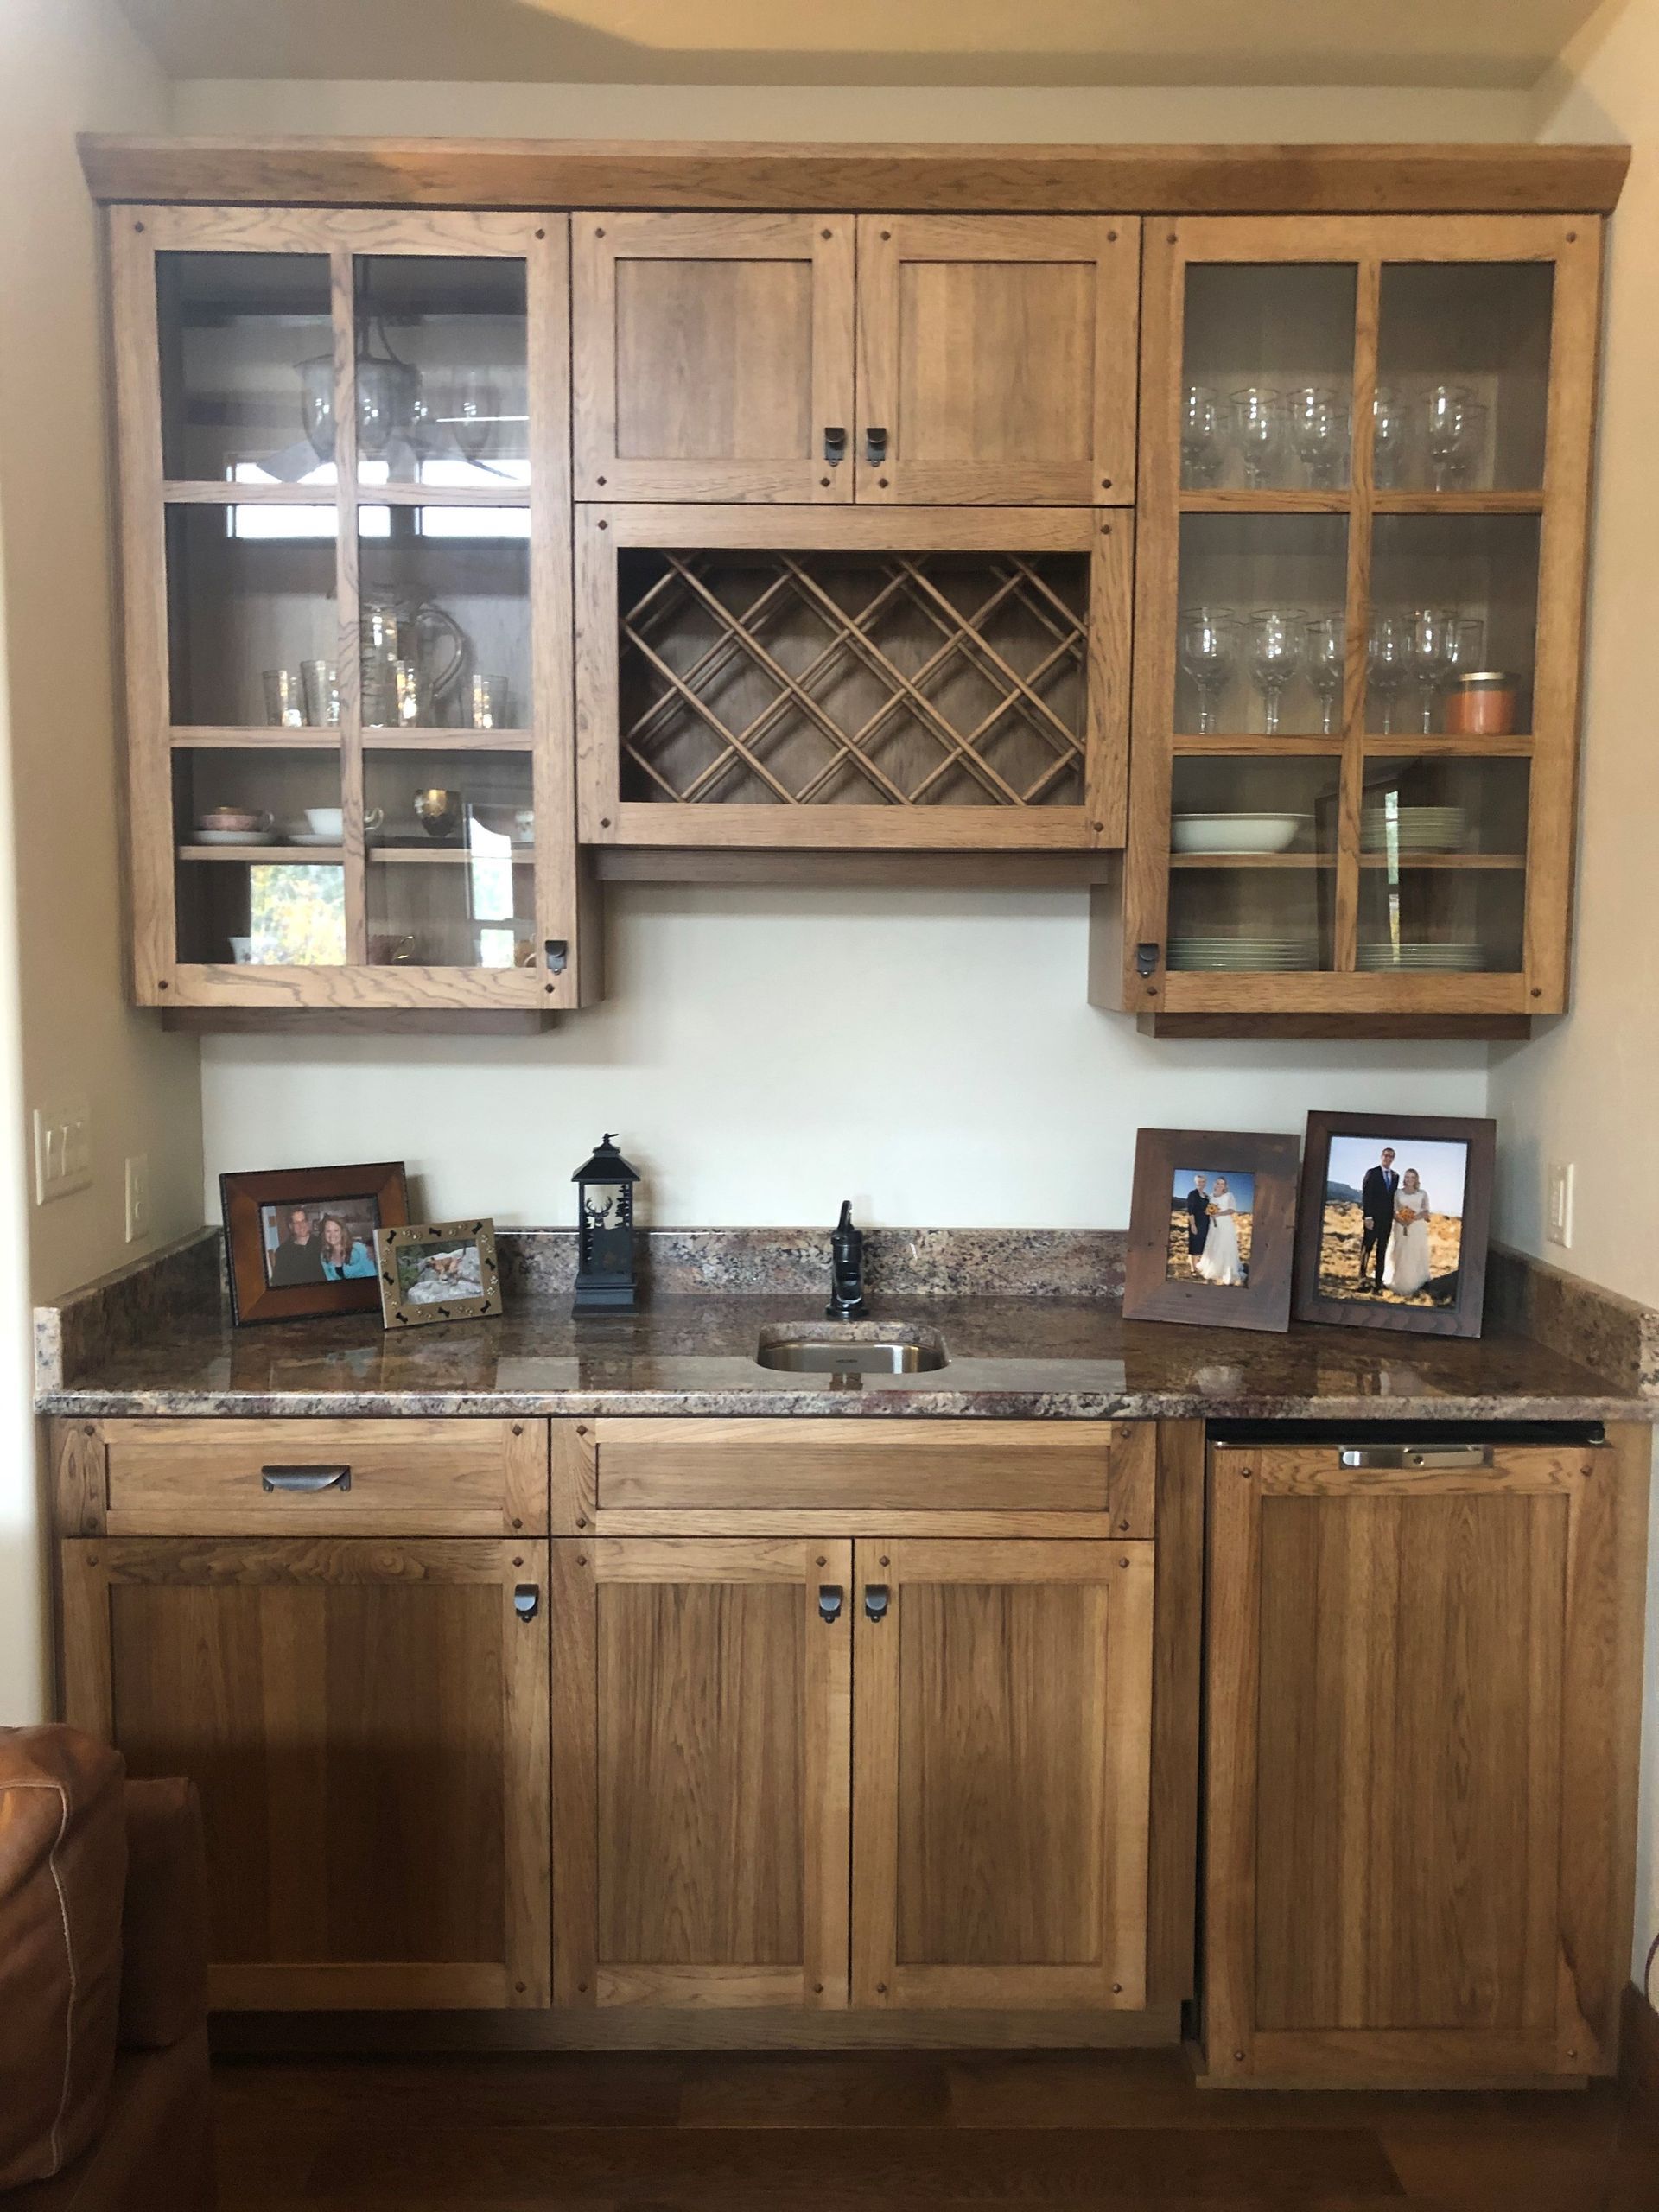 A kitchen with wooden cabinets and a wine rack